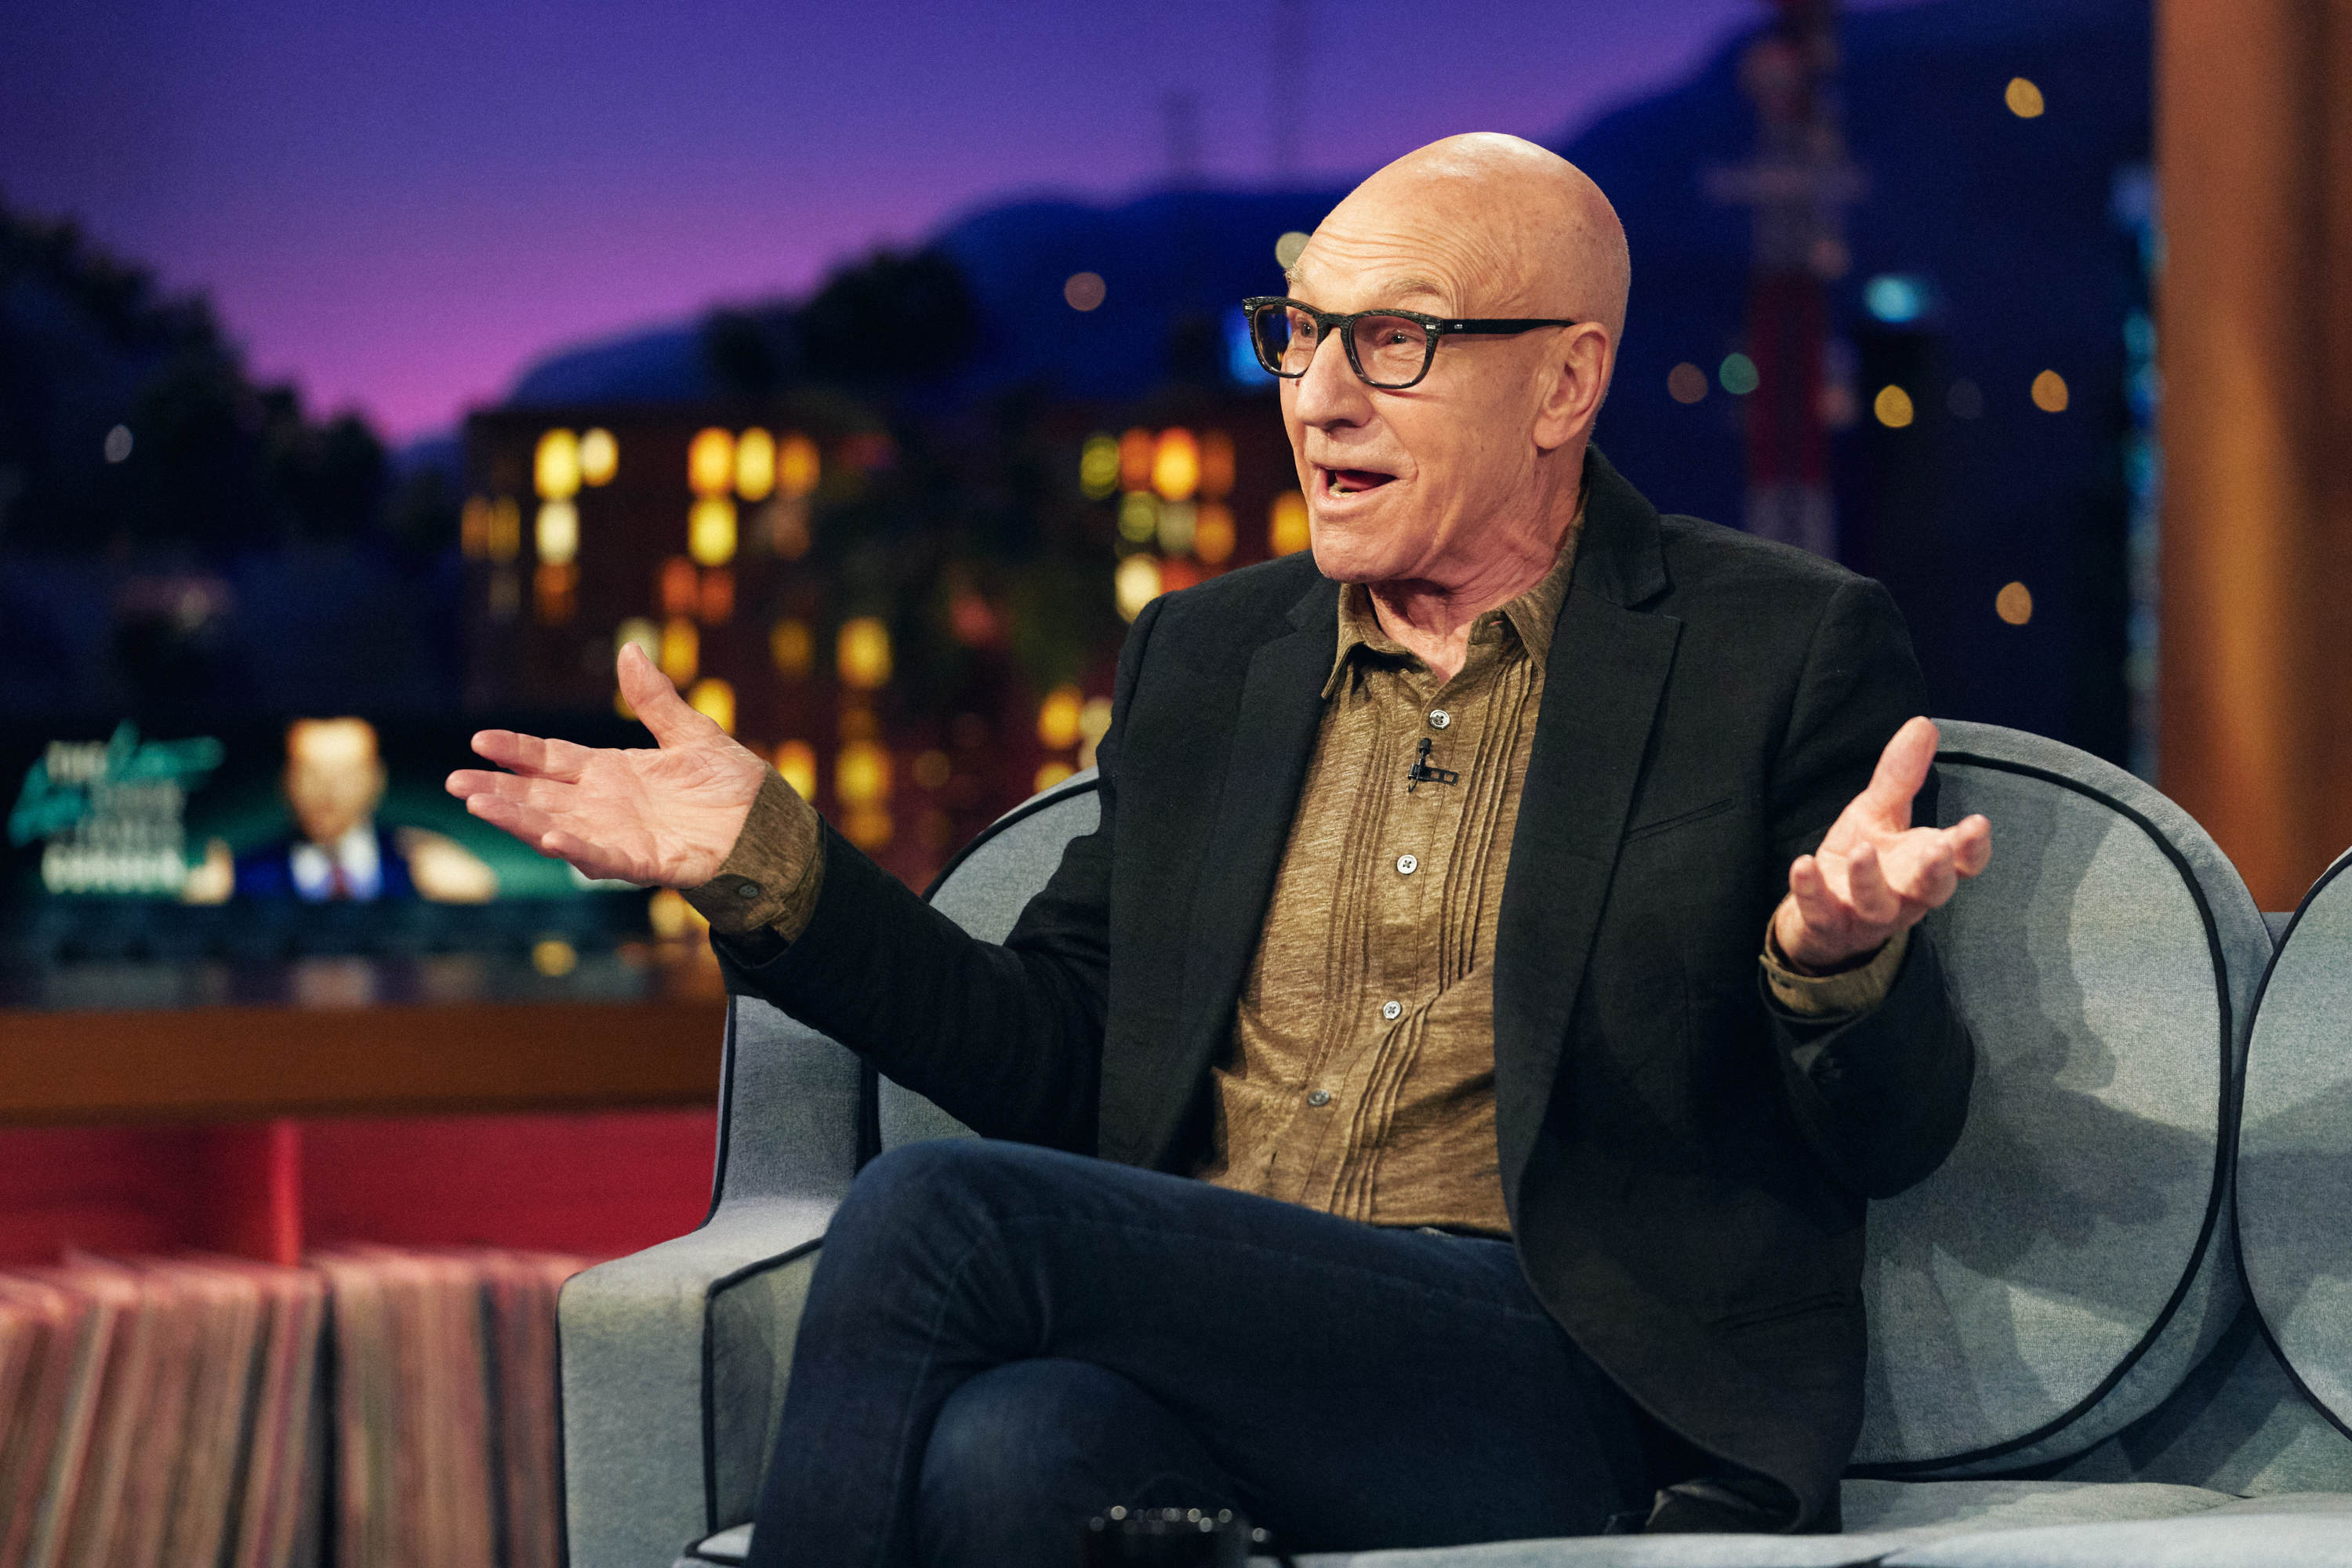 Patrick Stewart, who many fans believe is in 'Doctor Strange 2,' wears a black suit jacket over a light brown button-up shirt and jeans. He is also wearing black-framed glasses.